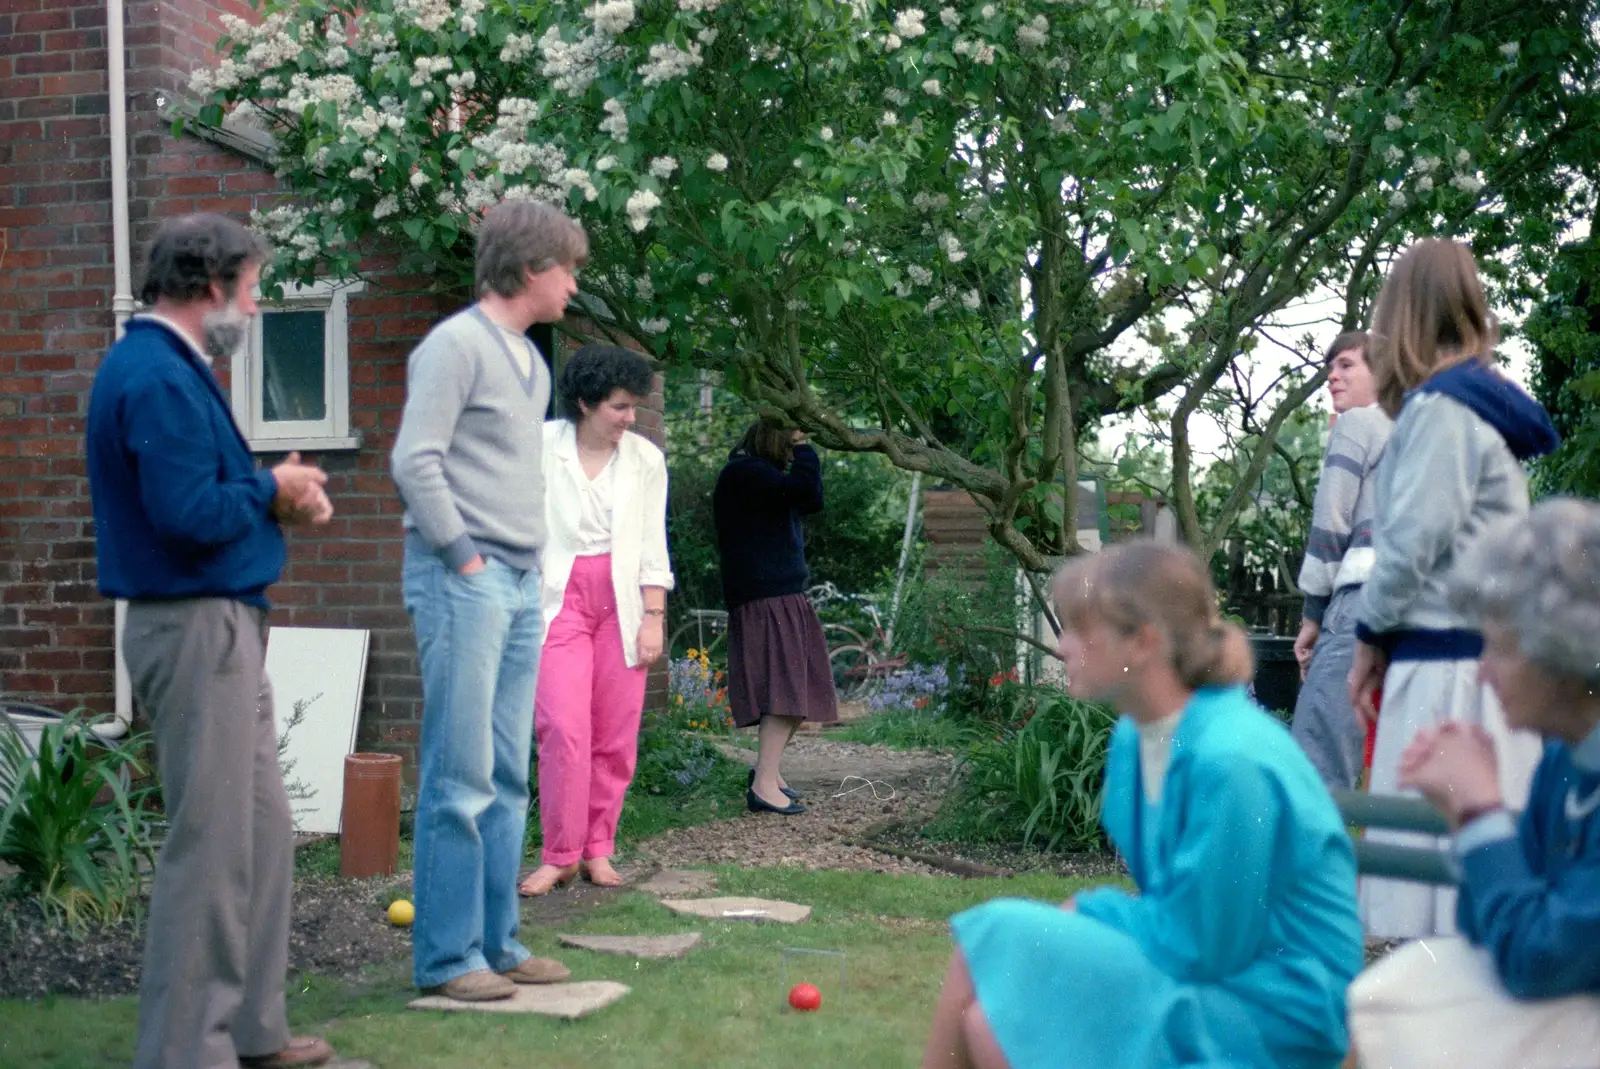 People mill around playing croquet, from Nosher's 18th Birthday, Barton on Sea, Hampshire - 26th May 1985